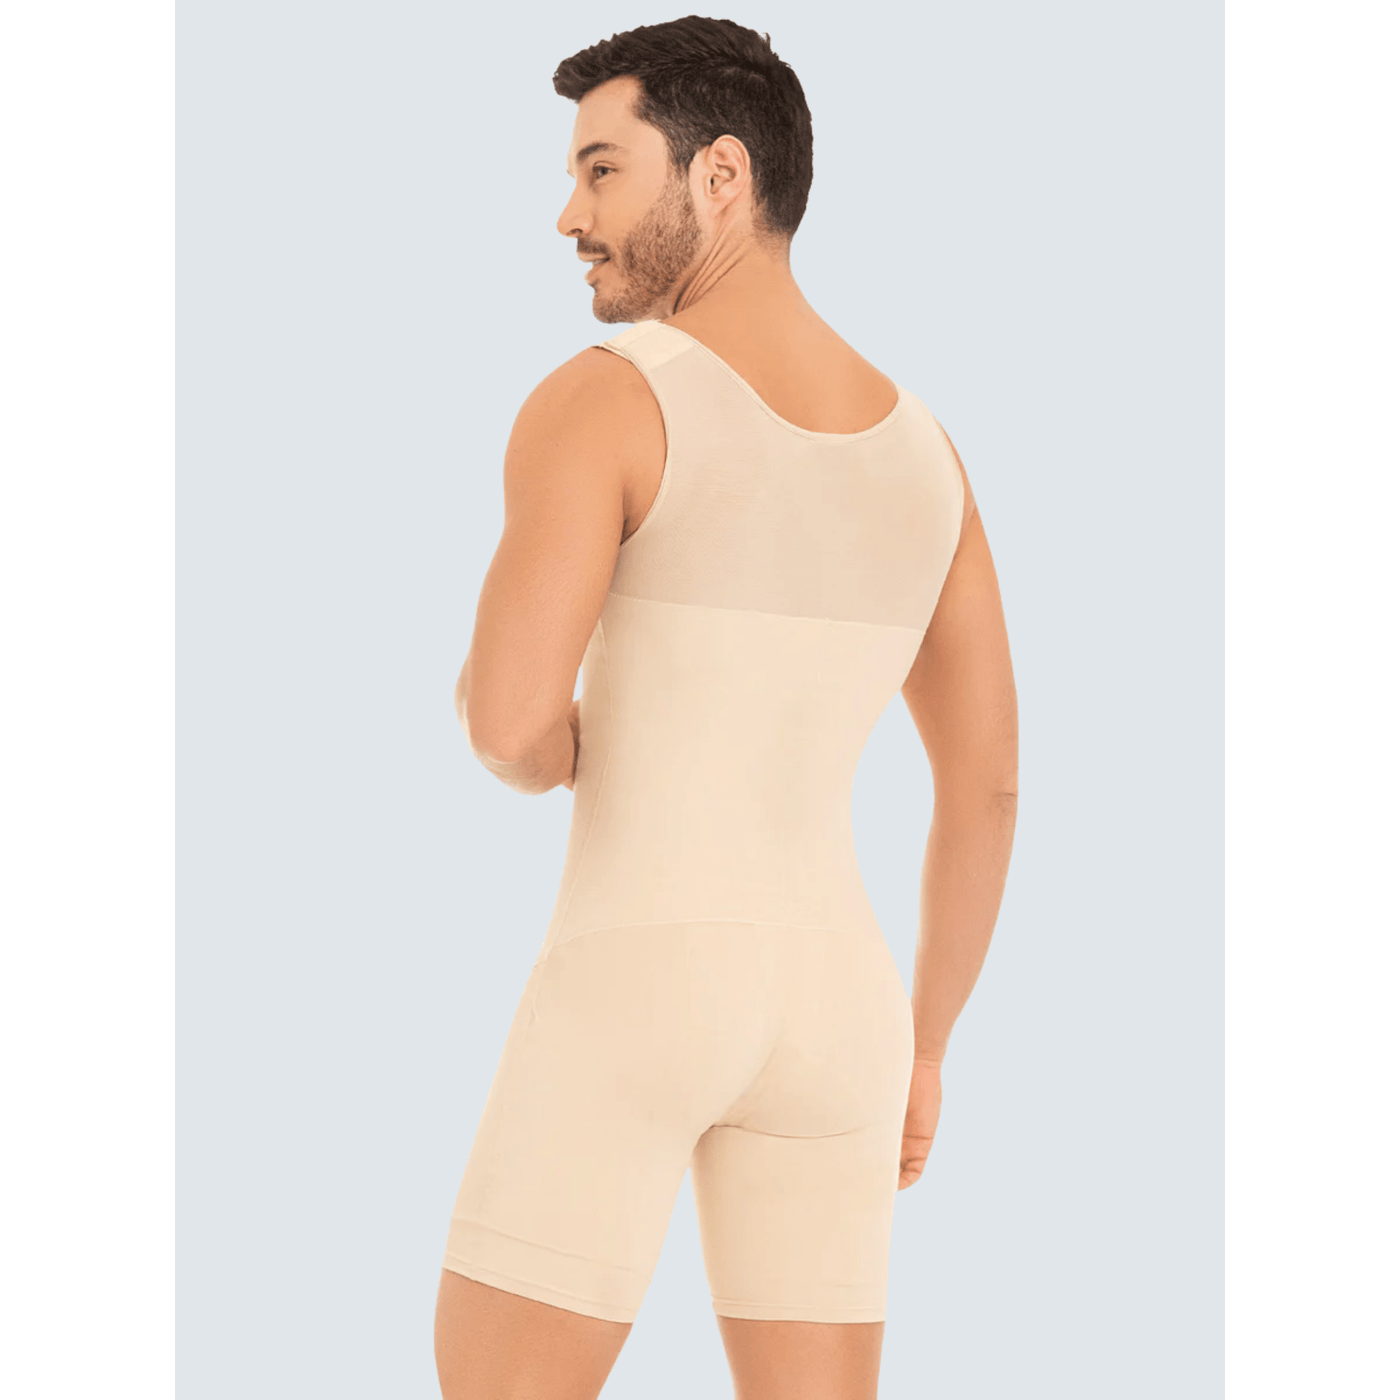 KNEE-LENGTH FAJA 4 FRONT HOOKS BACK COVERAGE AND WIDE STRAPS